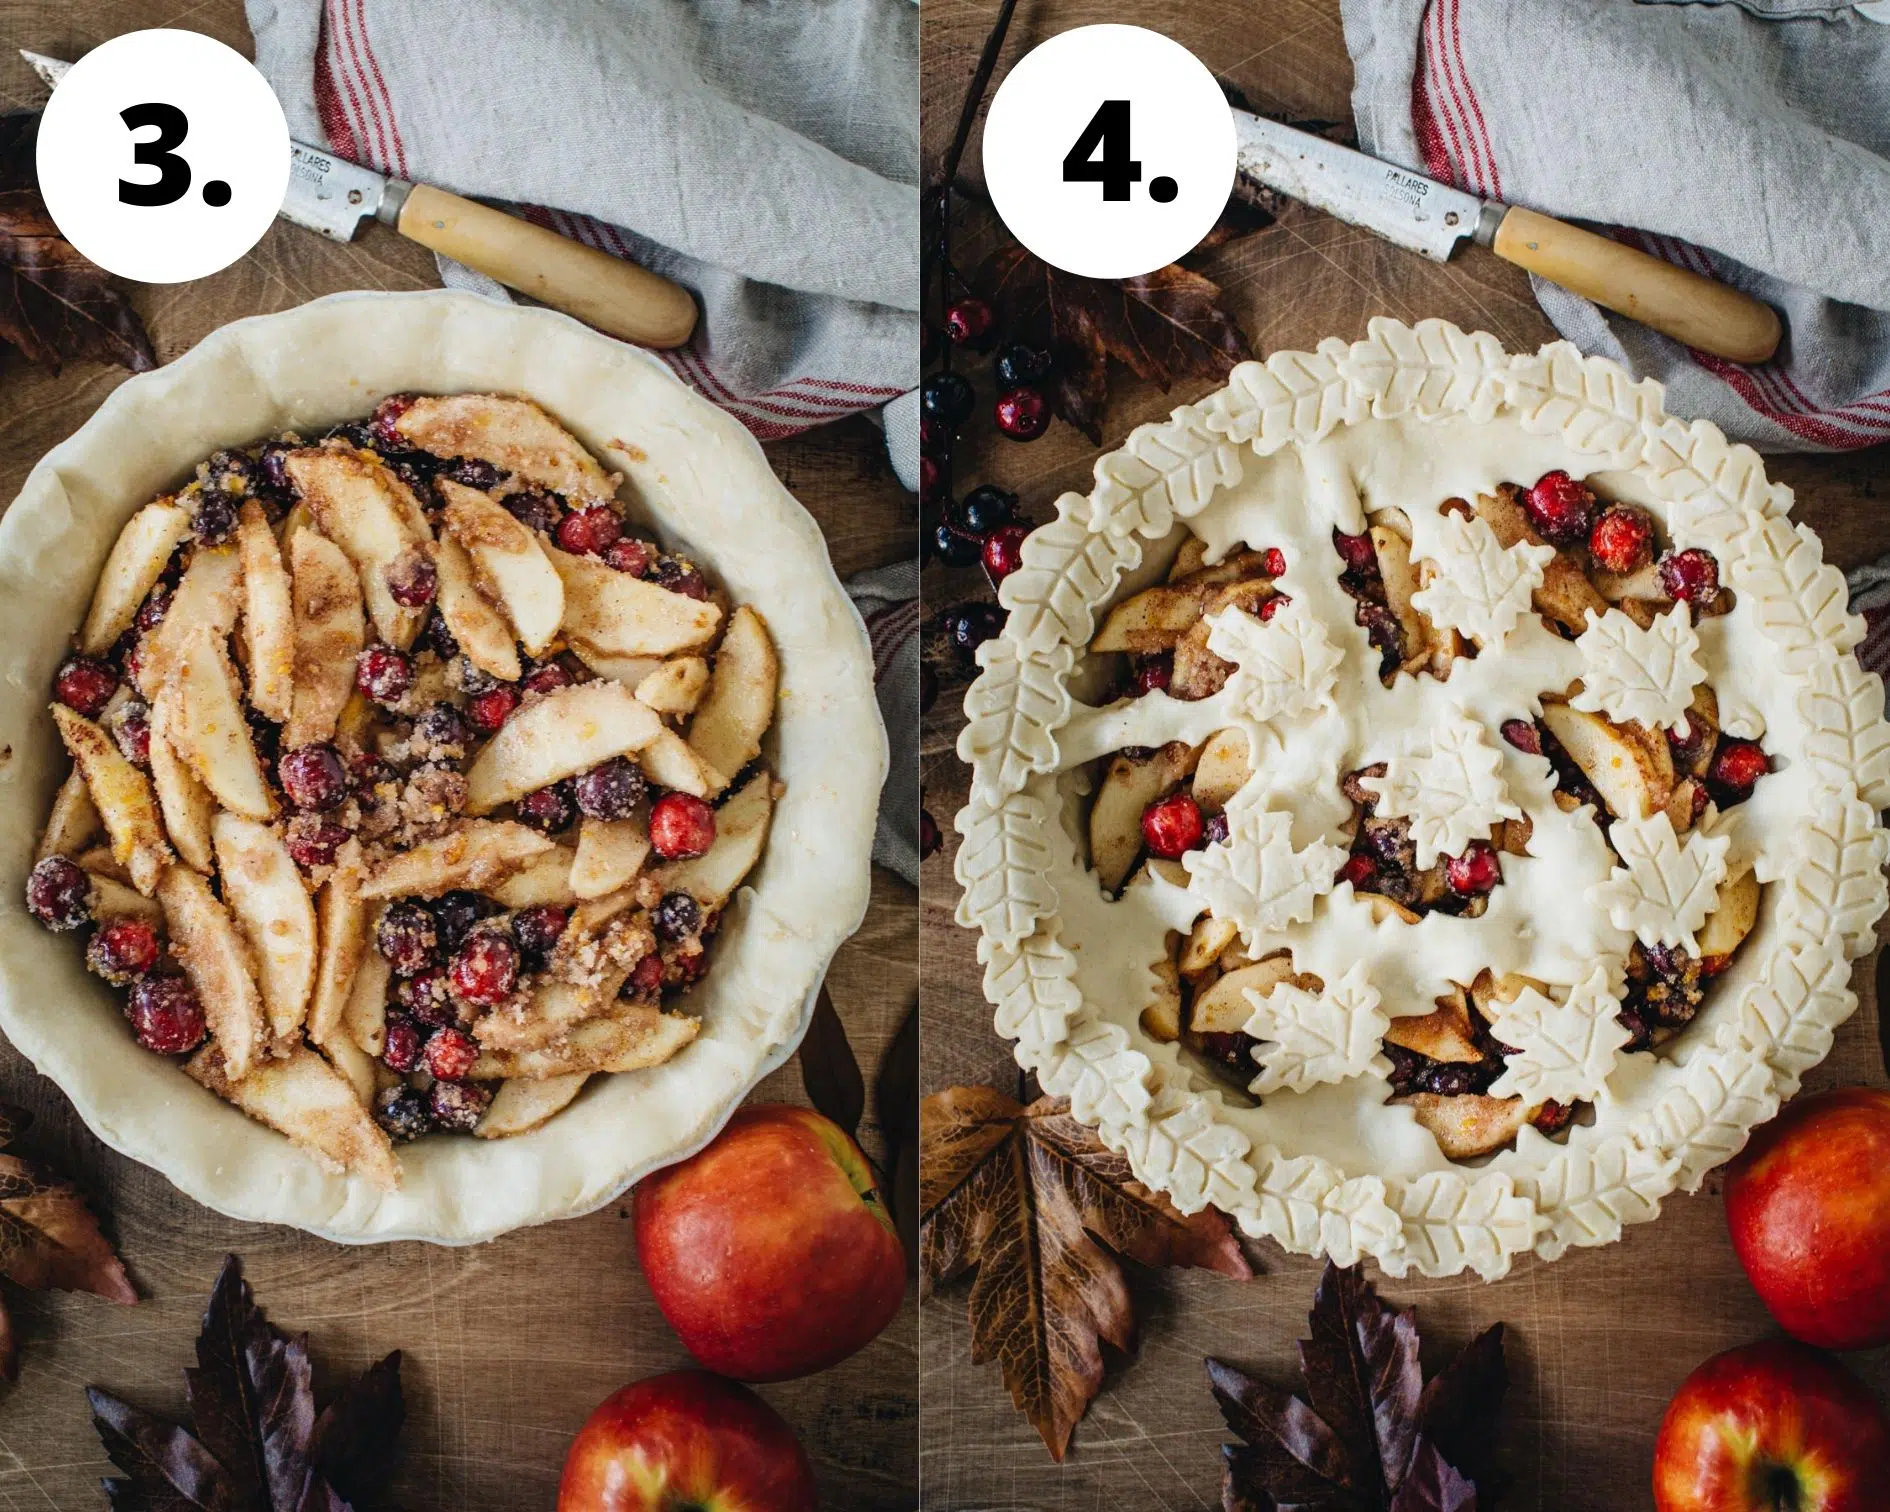 Apple cranberry pie process steps 3 and 4.